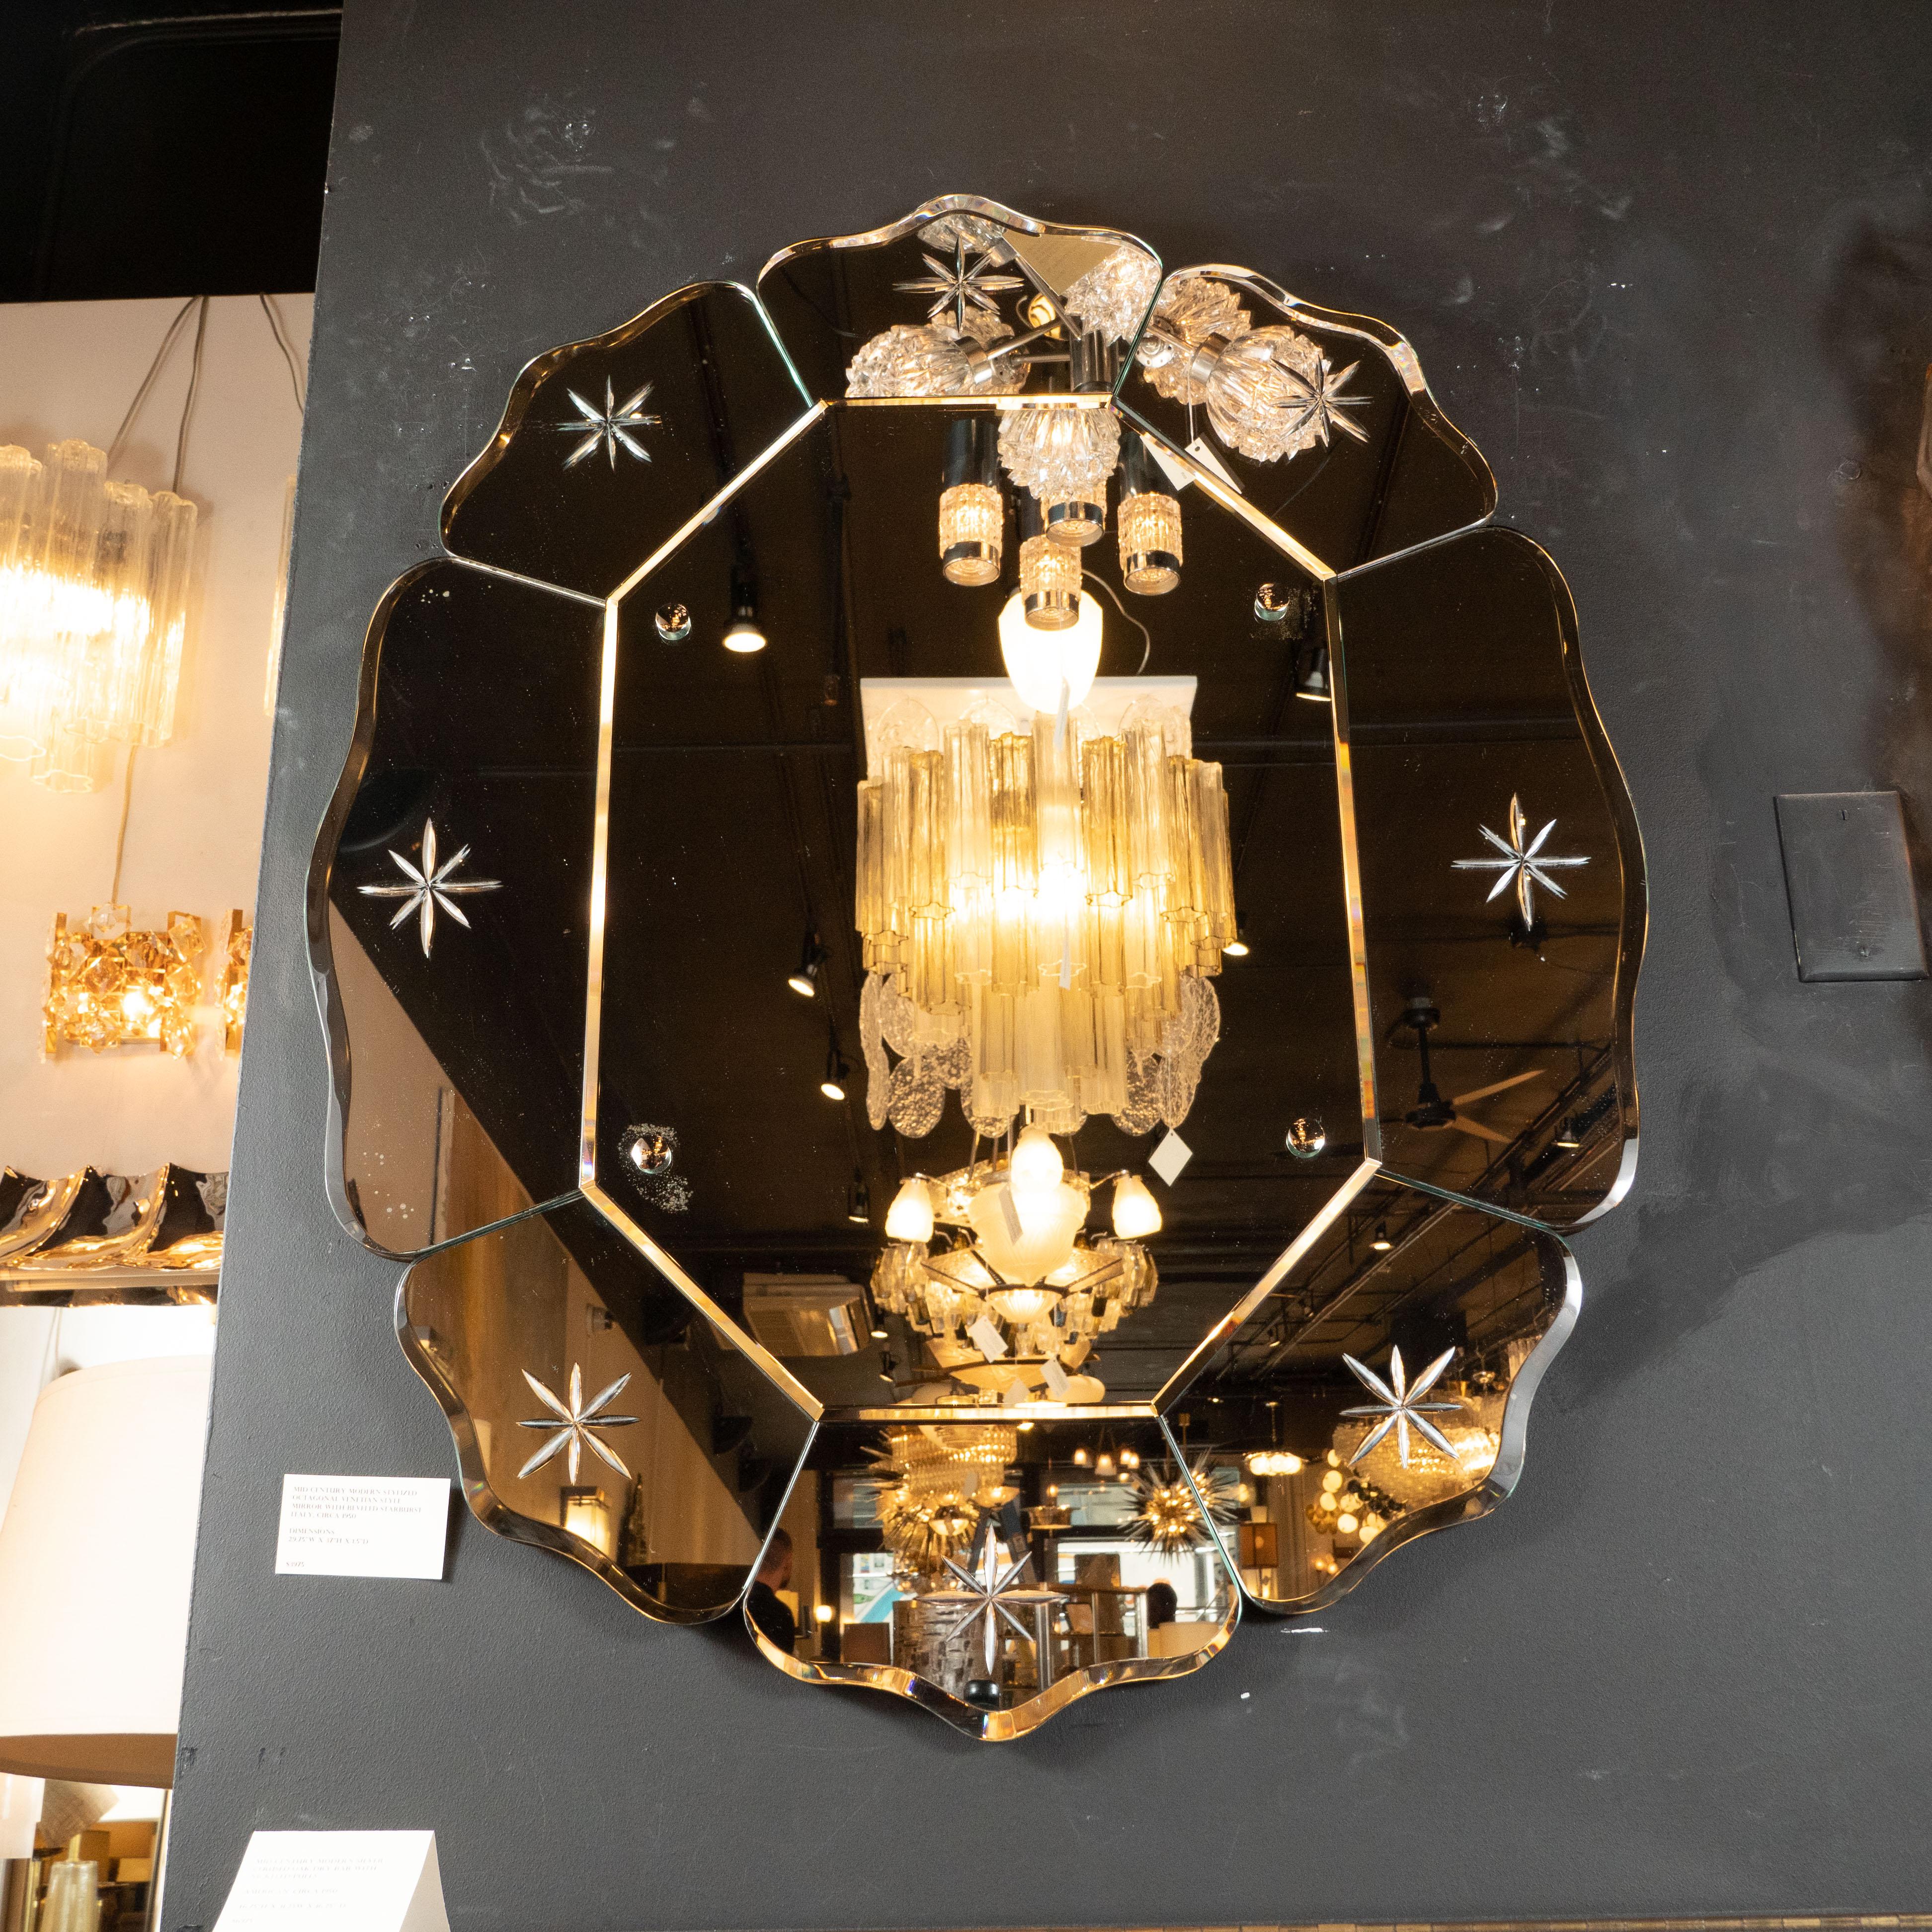 This elegant Mid-Century Modern wall mirror was realized in France, circa 1950. It features eight mirrored panels with beveled edges with etched eight point stylized star motifs in the center of each that surround a central octagonal mirror, secured